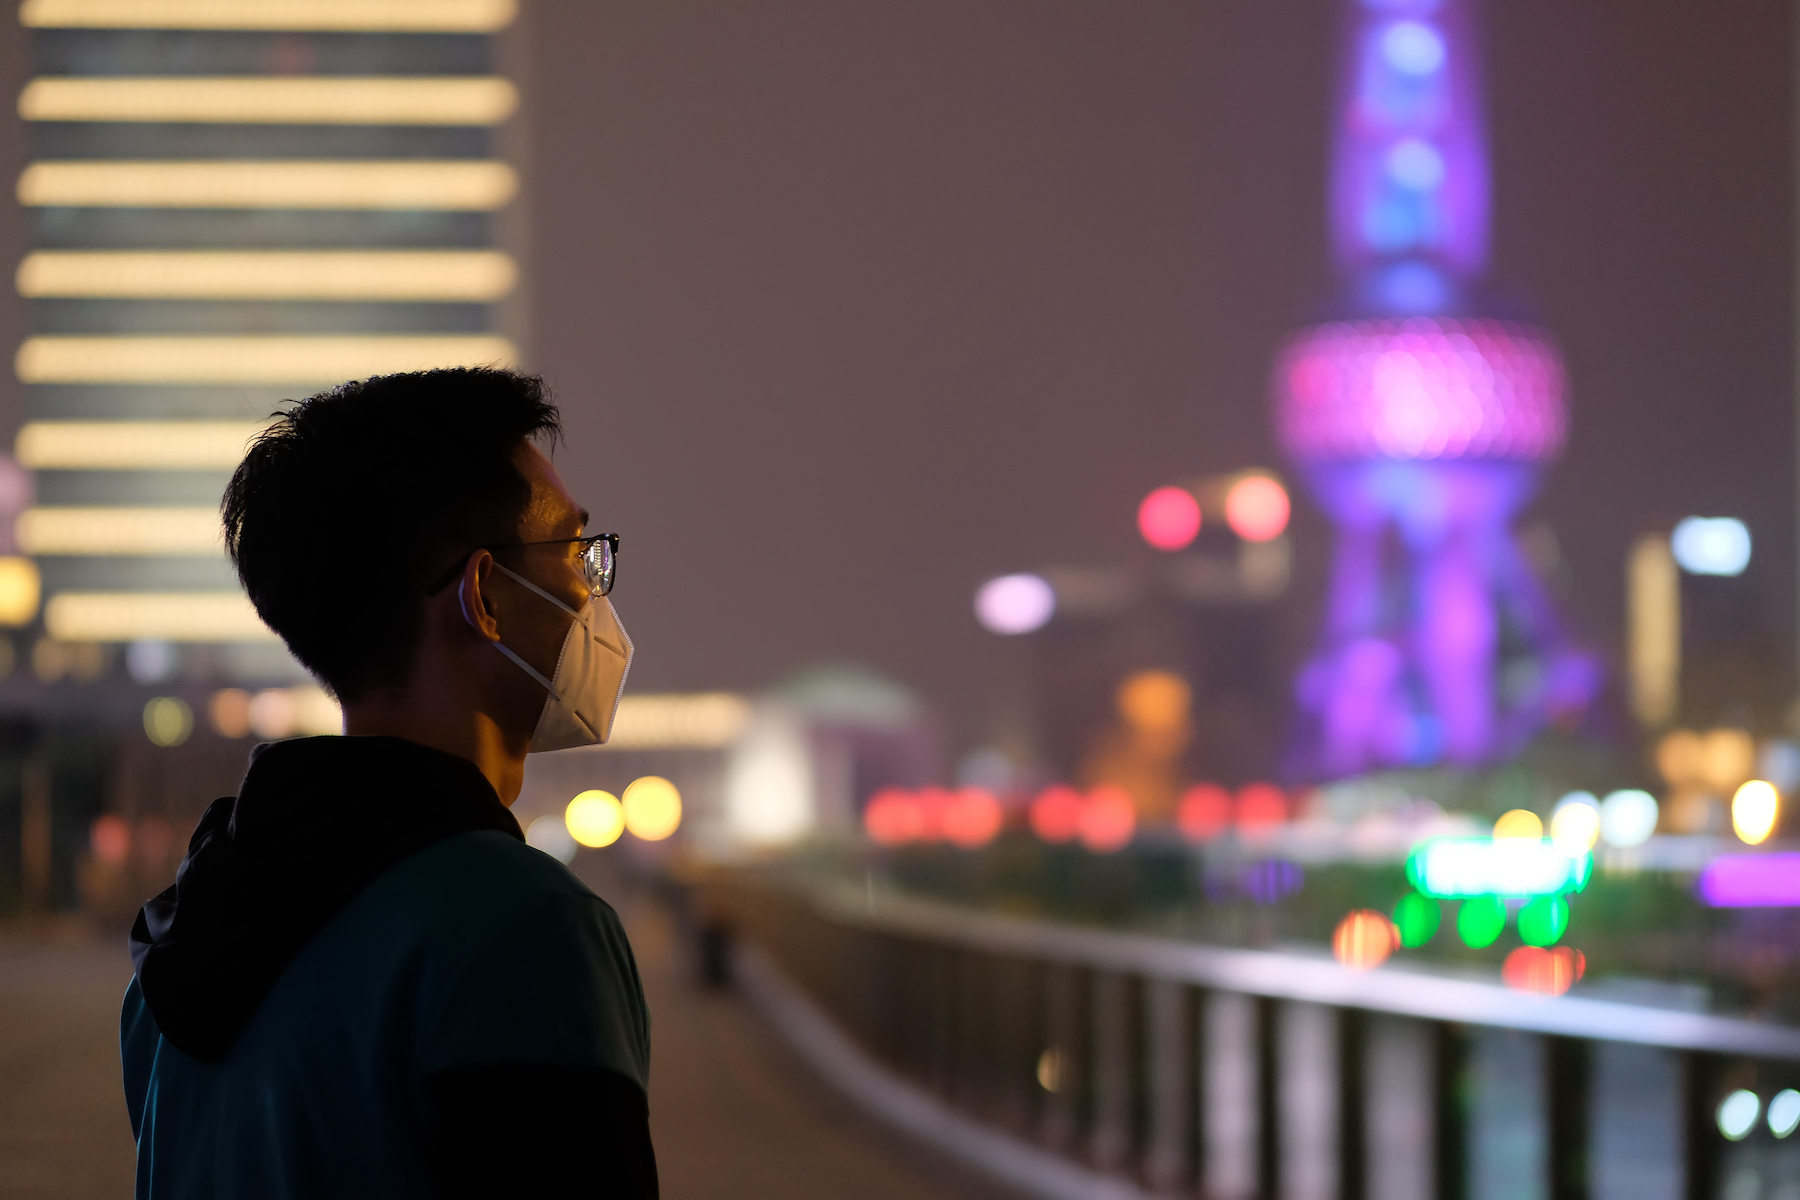 A young person in Shanghai stands alone wearing a medical face mask and looks off at the colourful skyline